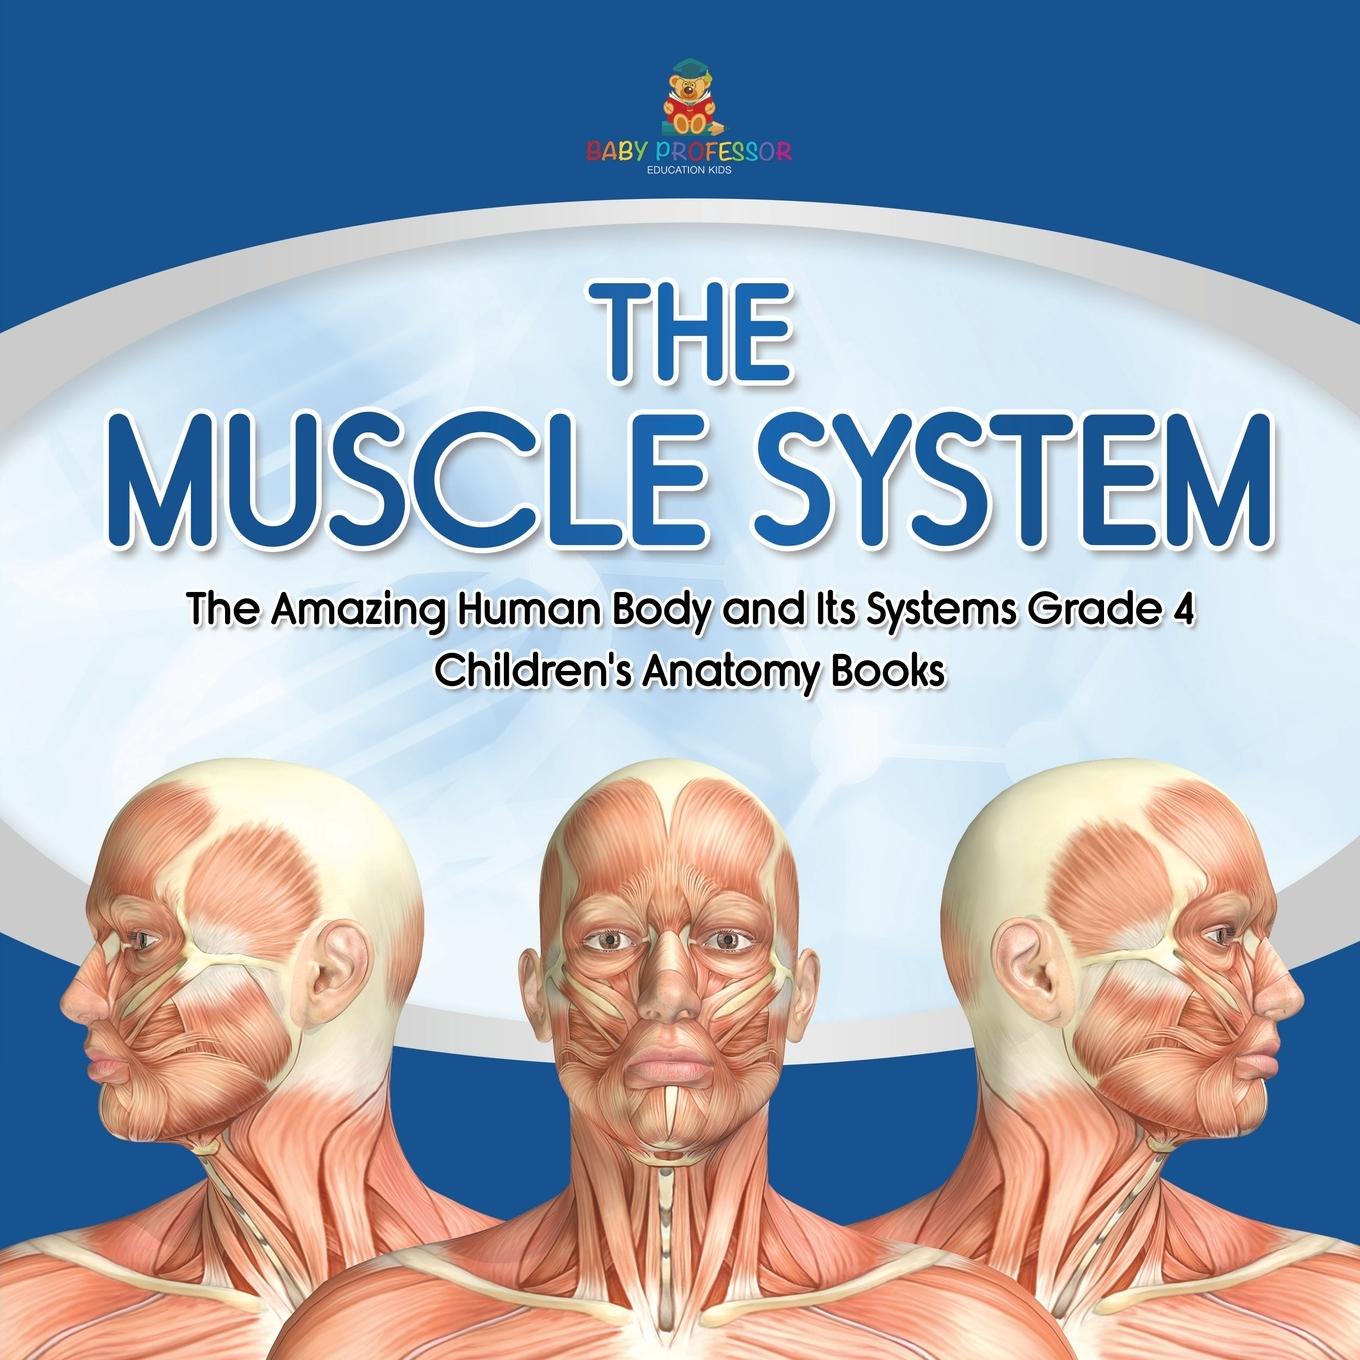 Kniha Muscle System The Amazing Human Body and Its Systems Grade 4 Children's Anatomy Books Baby Professor